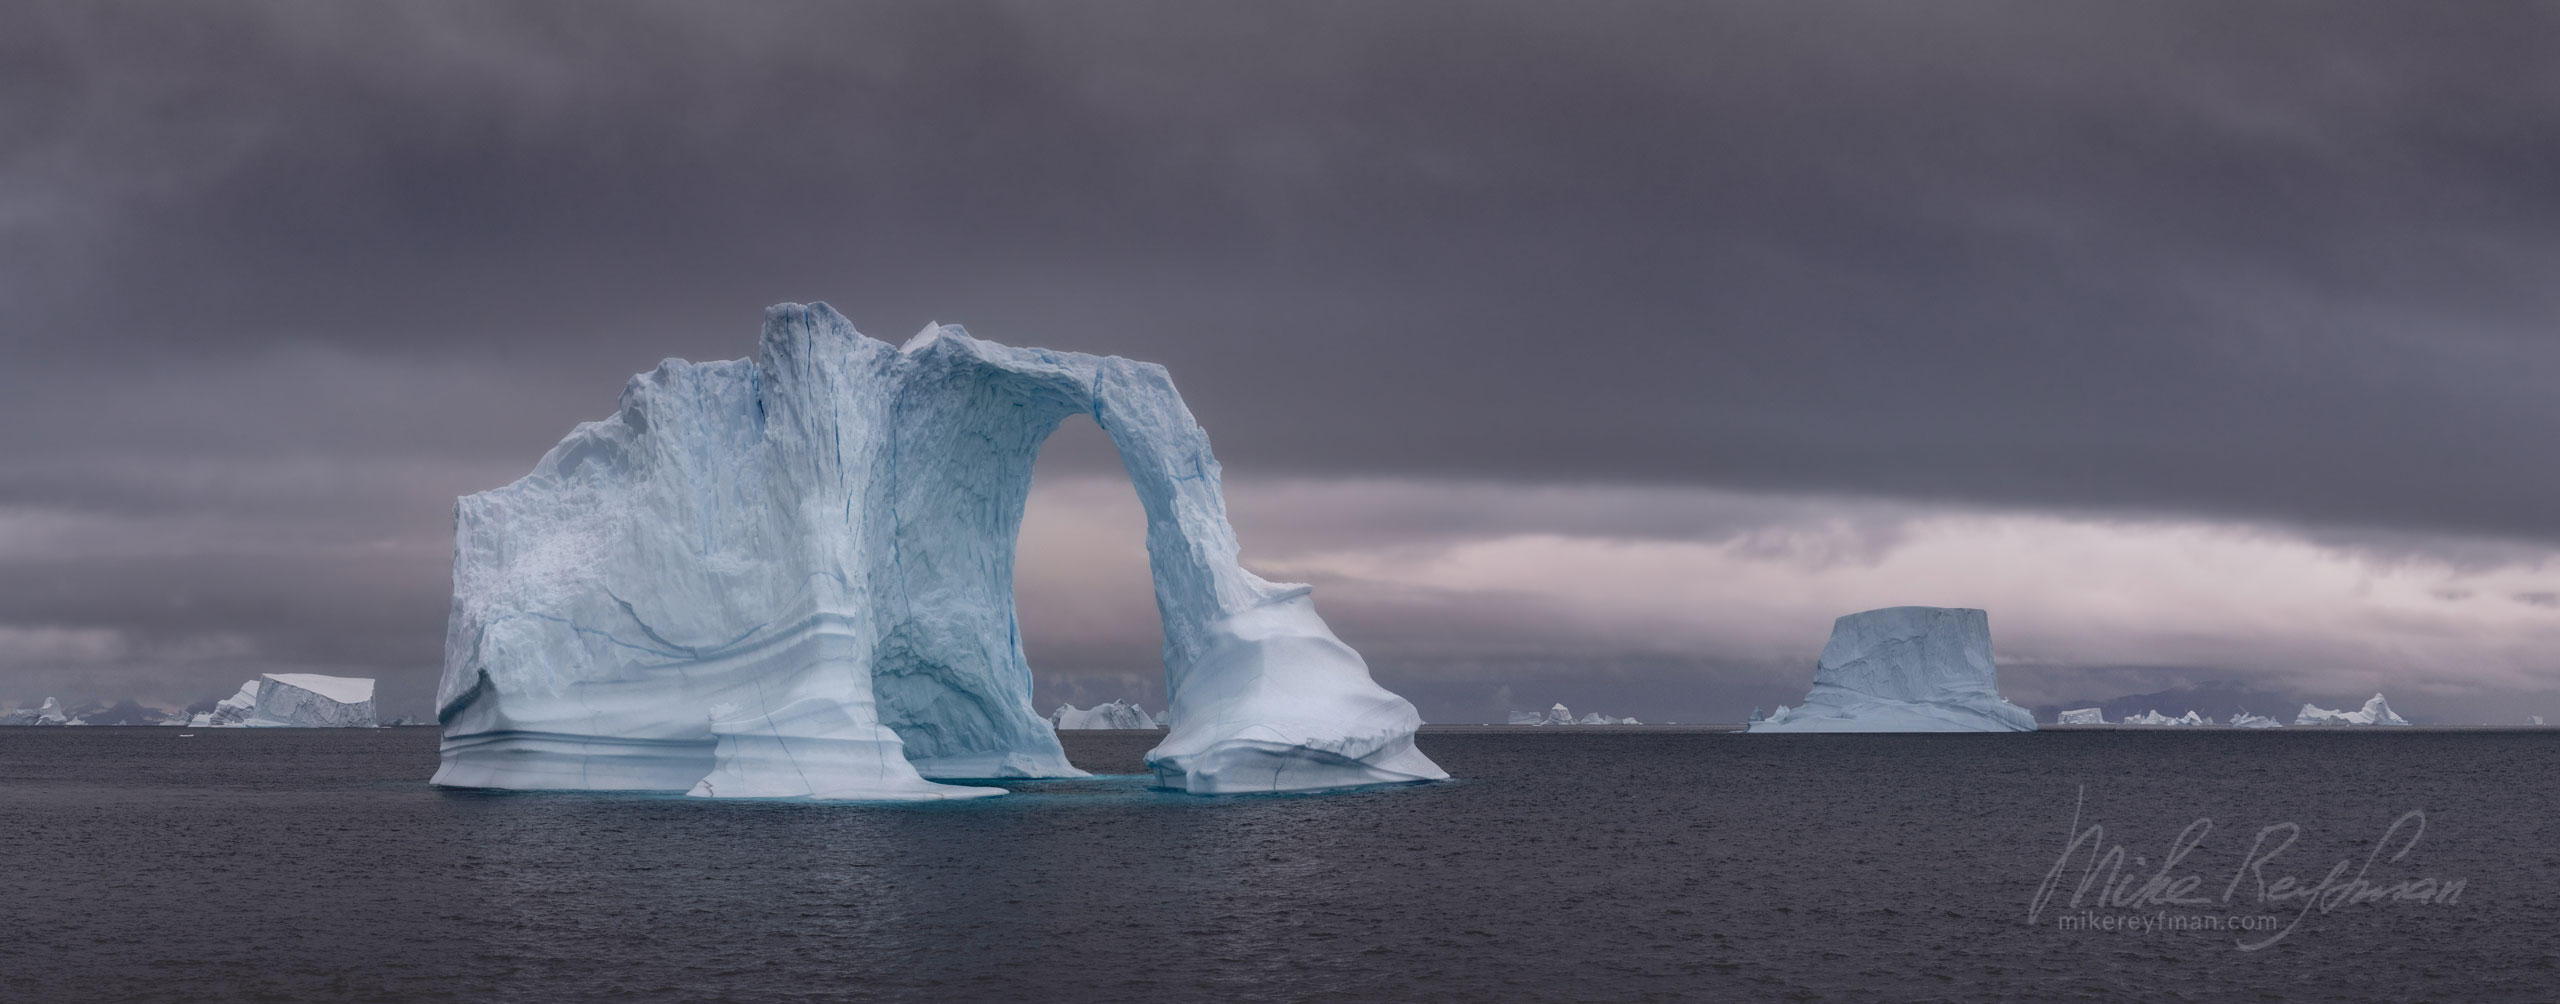 Icebergs in Scoresby Sund. Greenland. 074-GR-SC_50B8706_Pano-1x2.55 - The Scoresby Sund fjord system and the settlement of Ittoqqortoormiit. East Greenland. - Mike Reyfman Photography